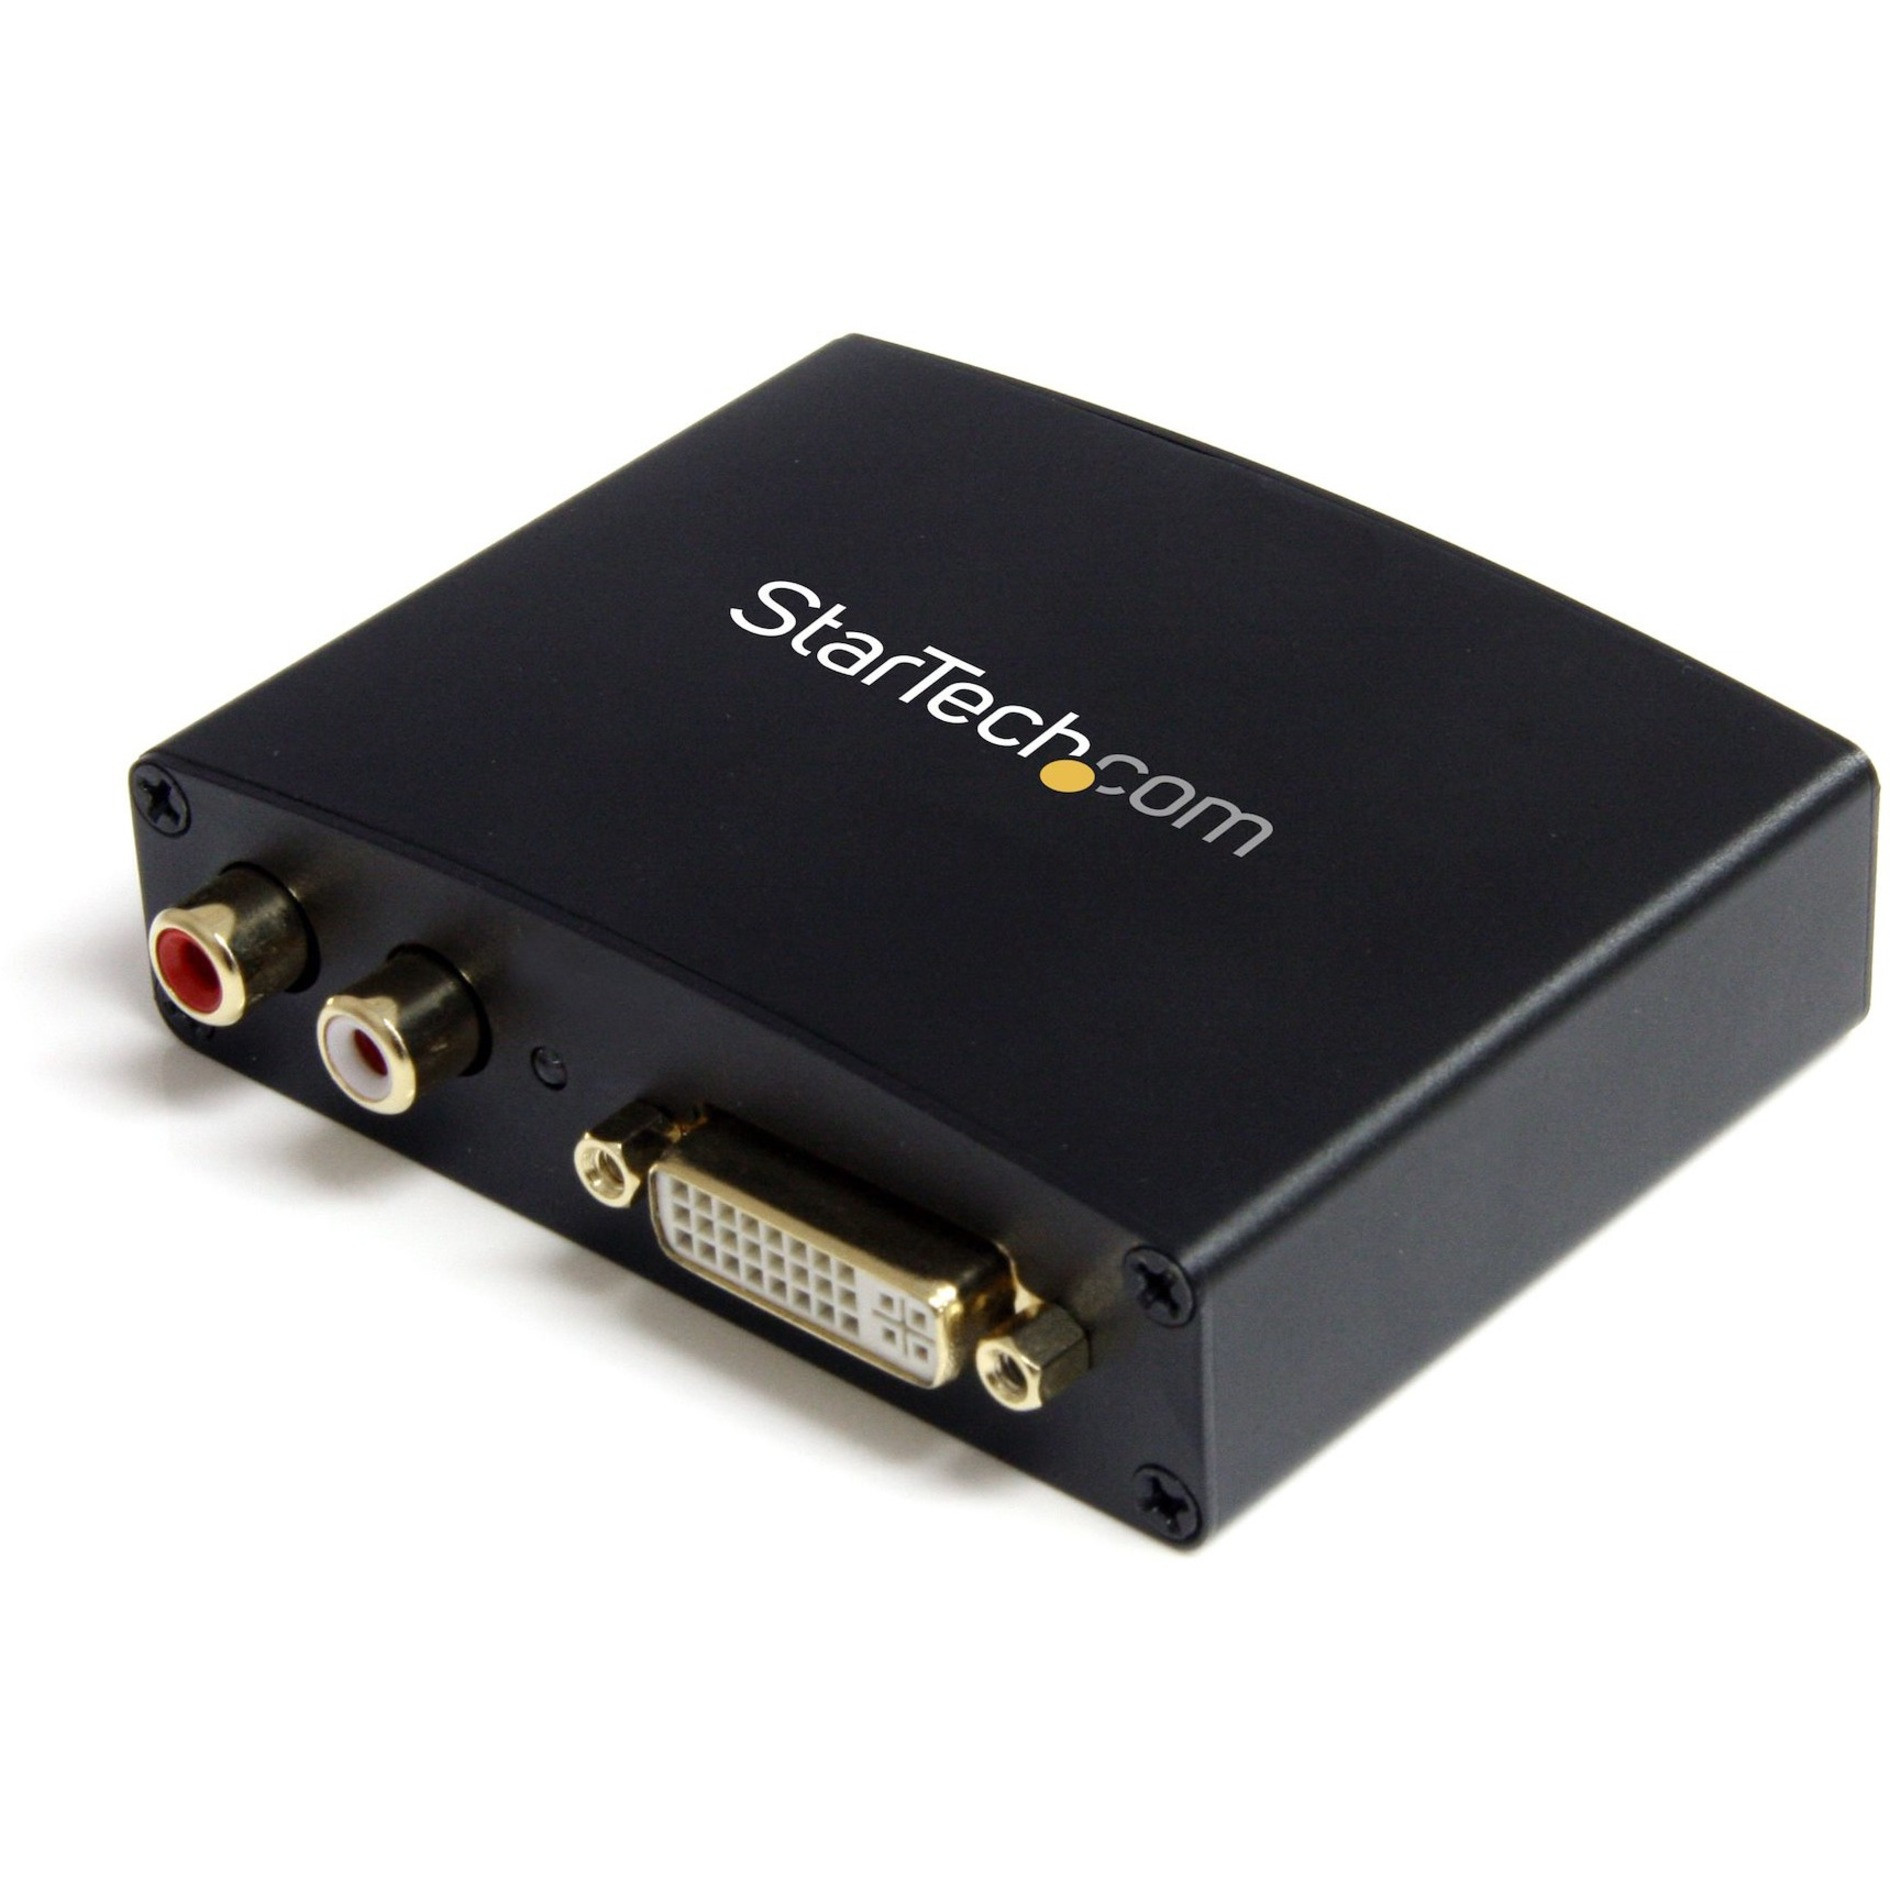 Disciplin tilpasningsevne parallel Startech .com DVI to HDMI Video Converter with AudioConnect a DVI-D source  device with RCA audio to an HDMI monitor/televisiondisplayport... DVI2HDMIA  - Corporate Armor